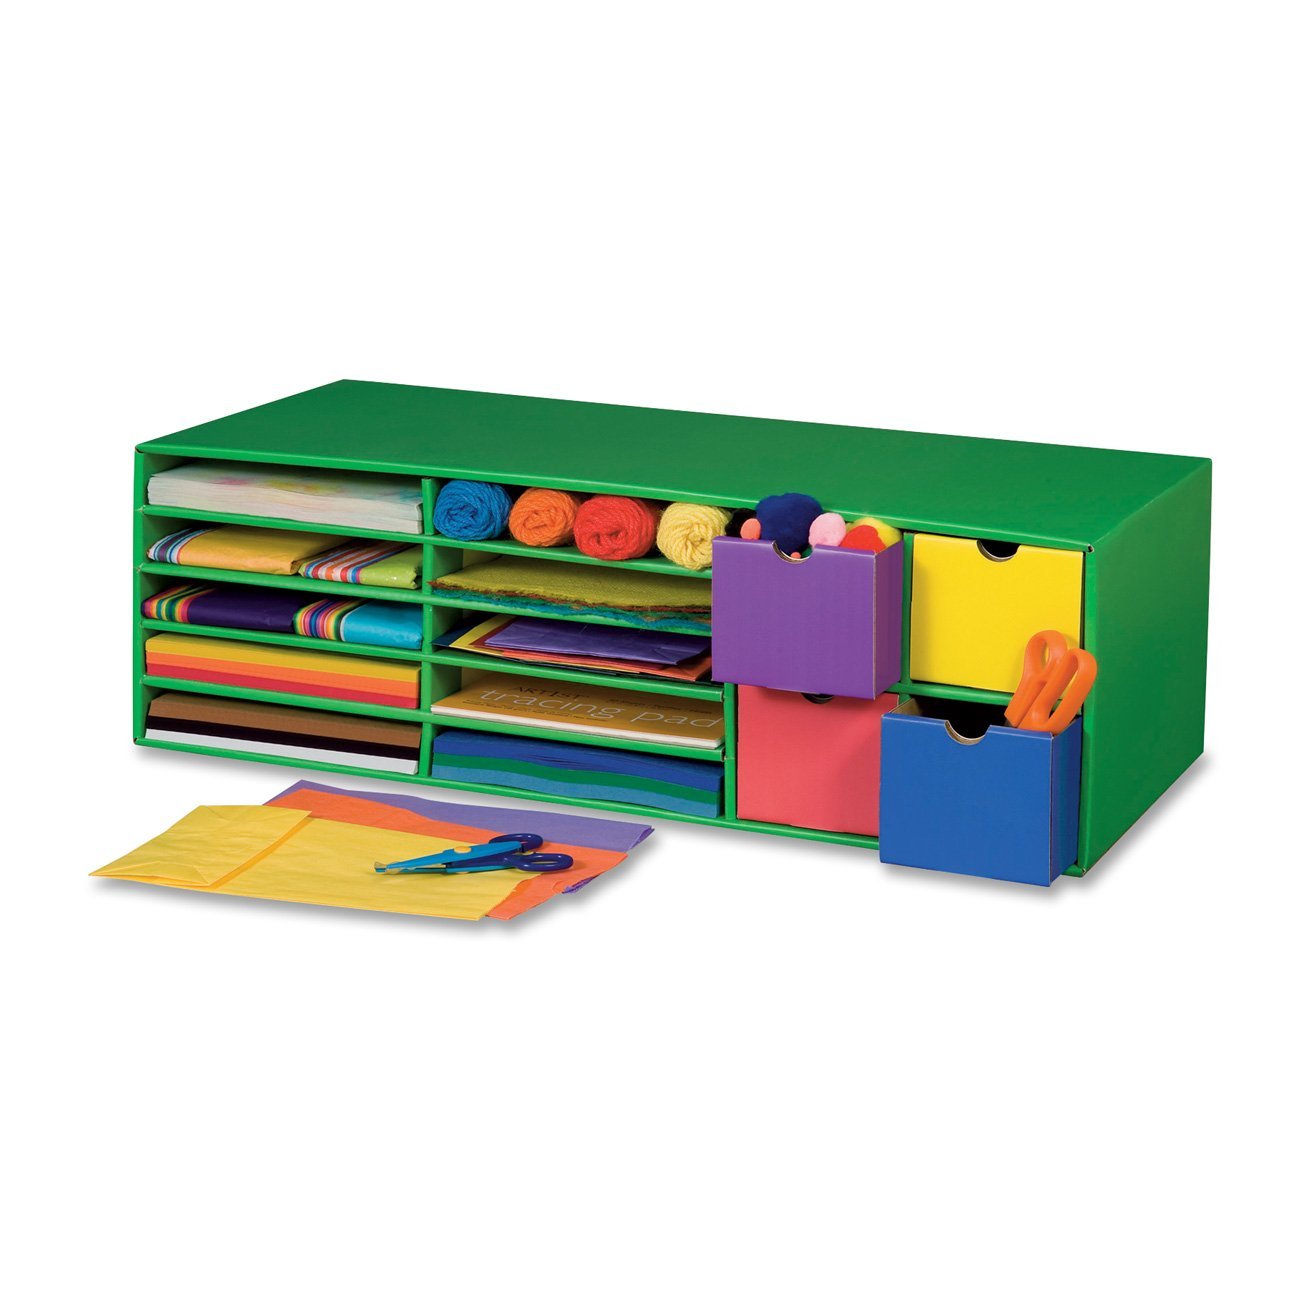 craft supplies organizer - great for a craftroom or classroom